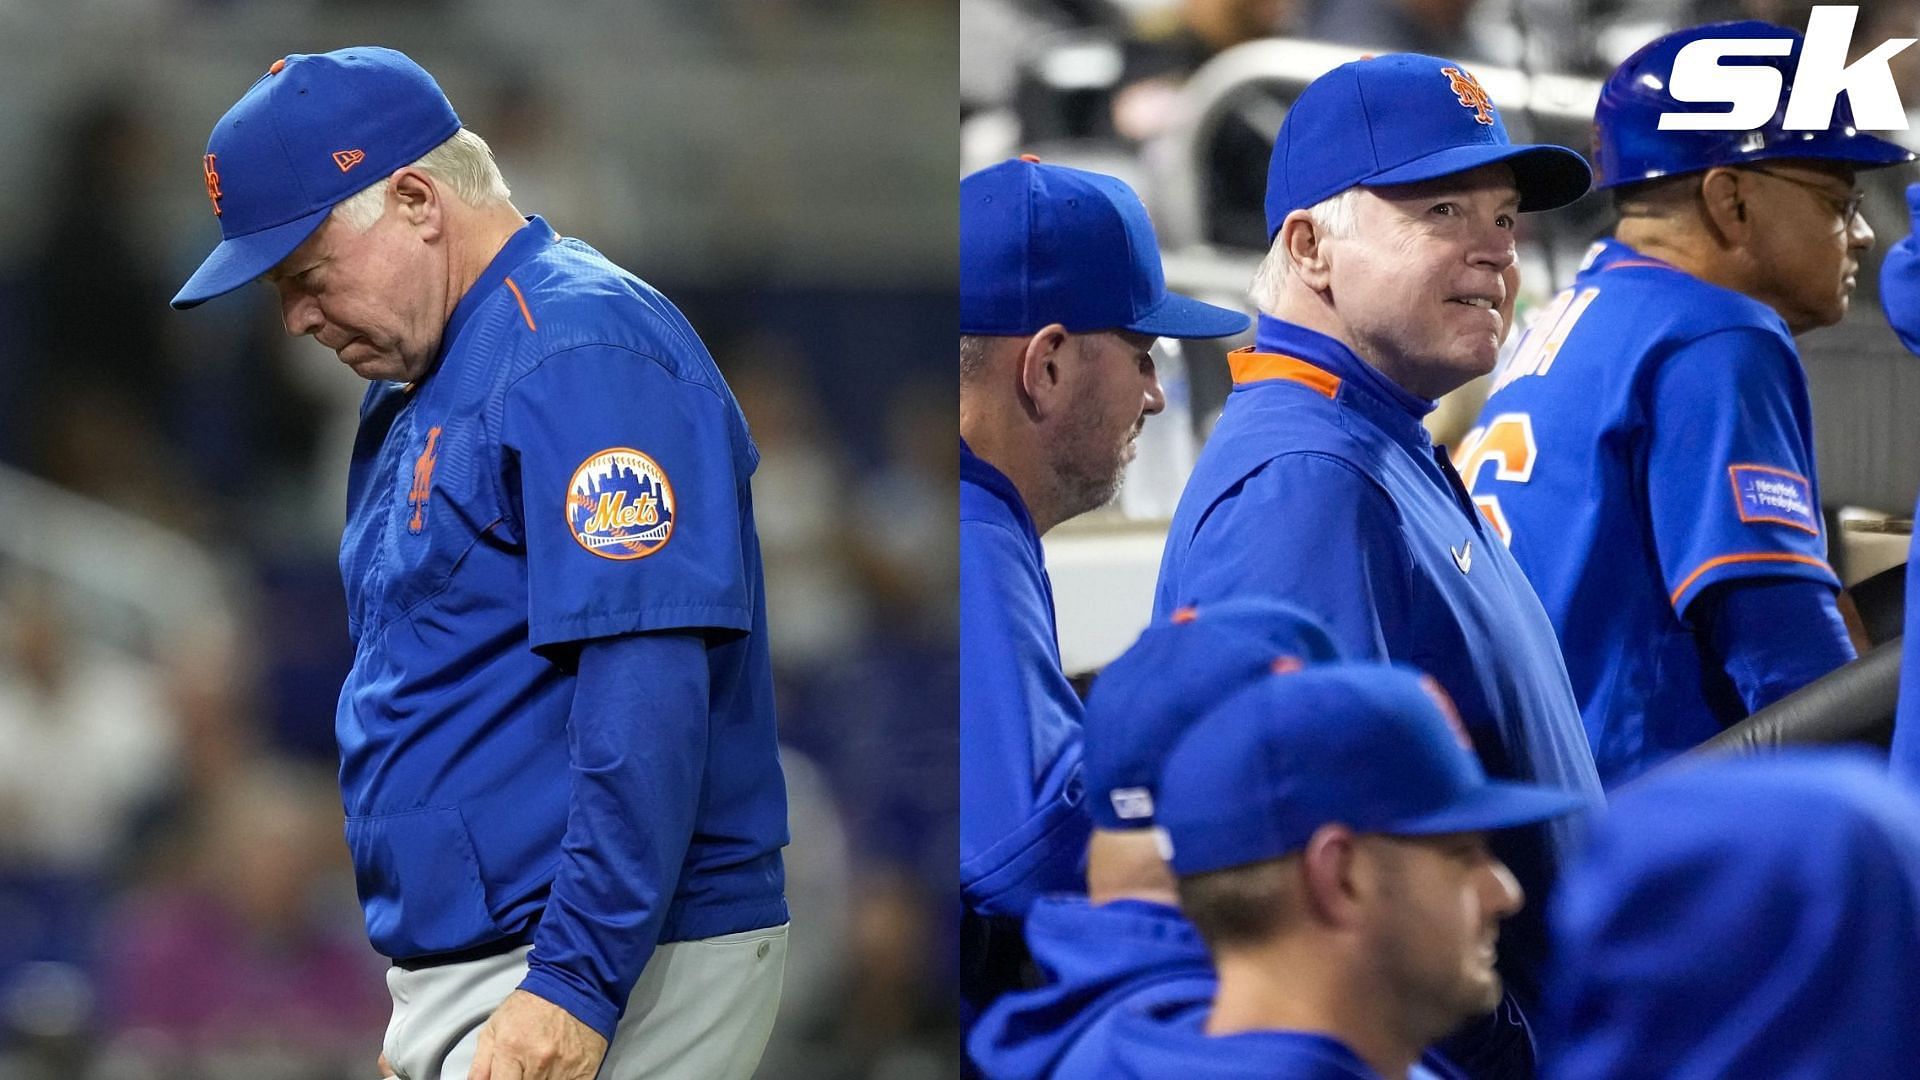 Mets fanbase ask for changes to top brass after Buck Showalter